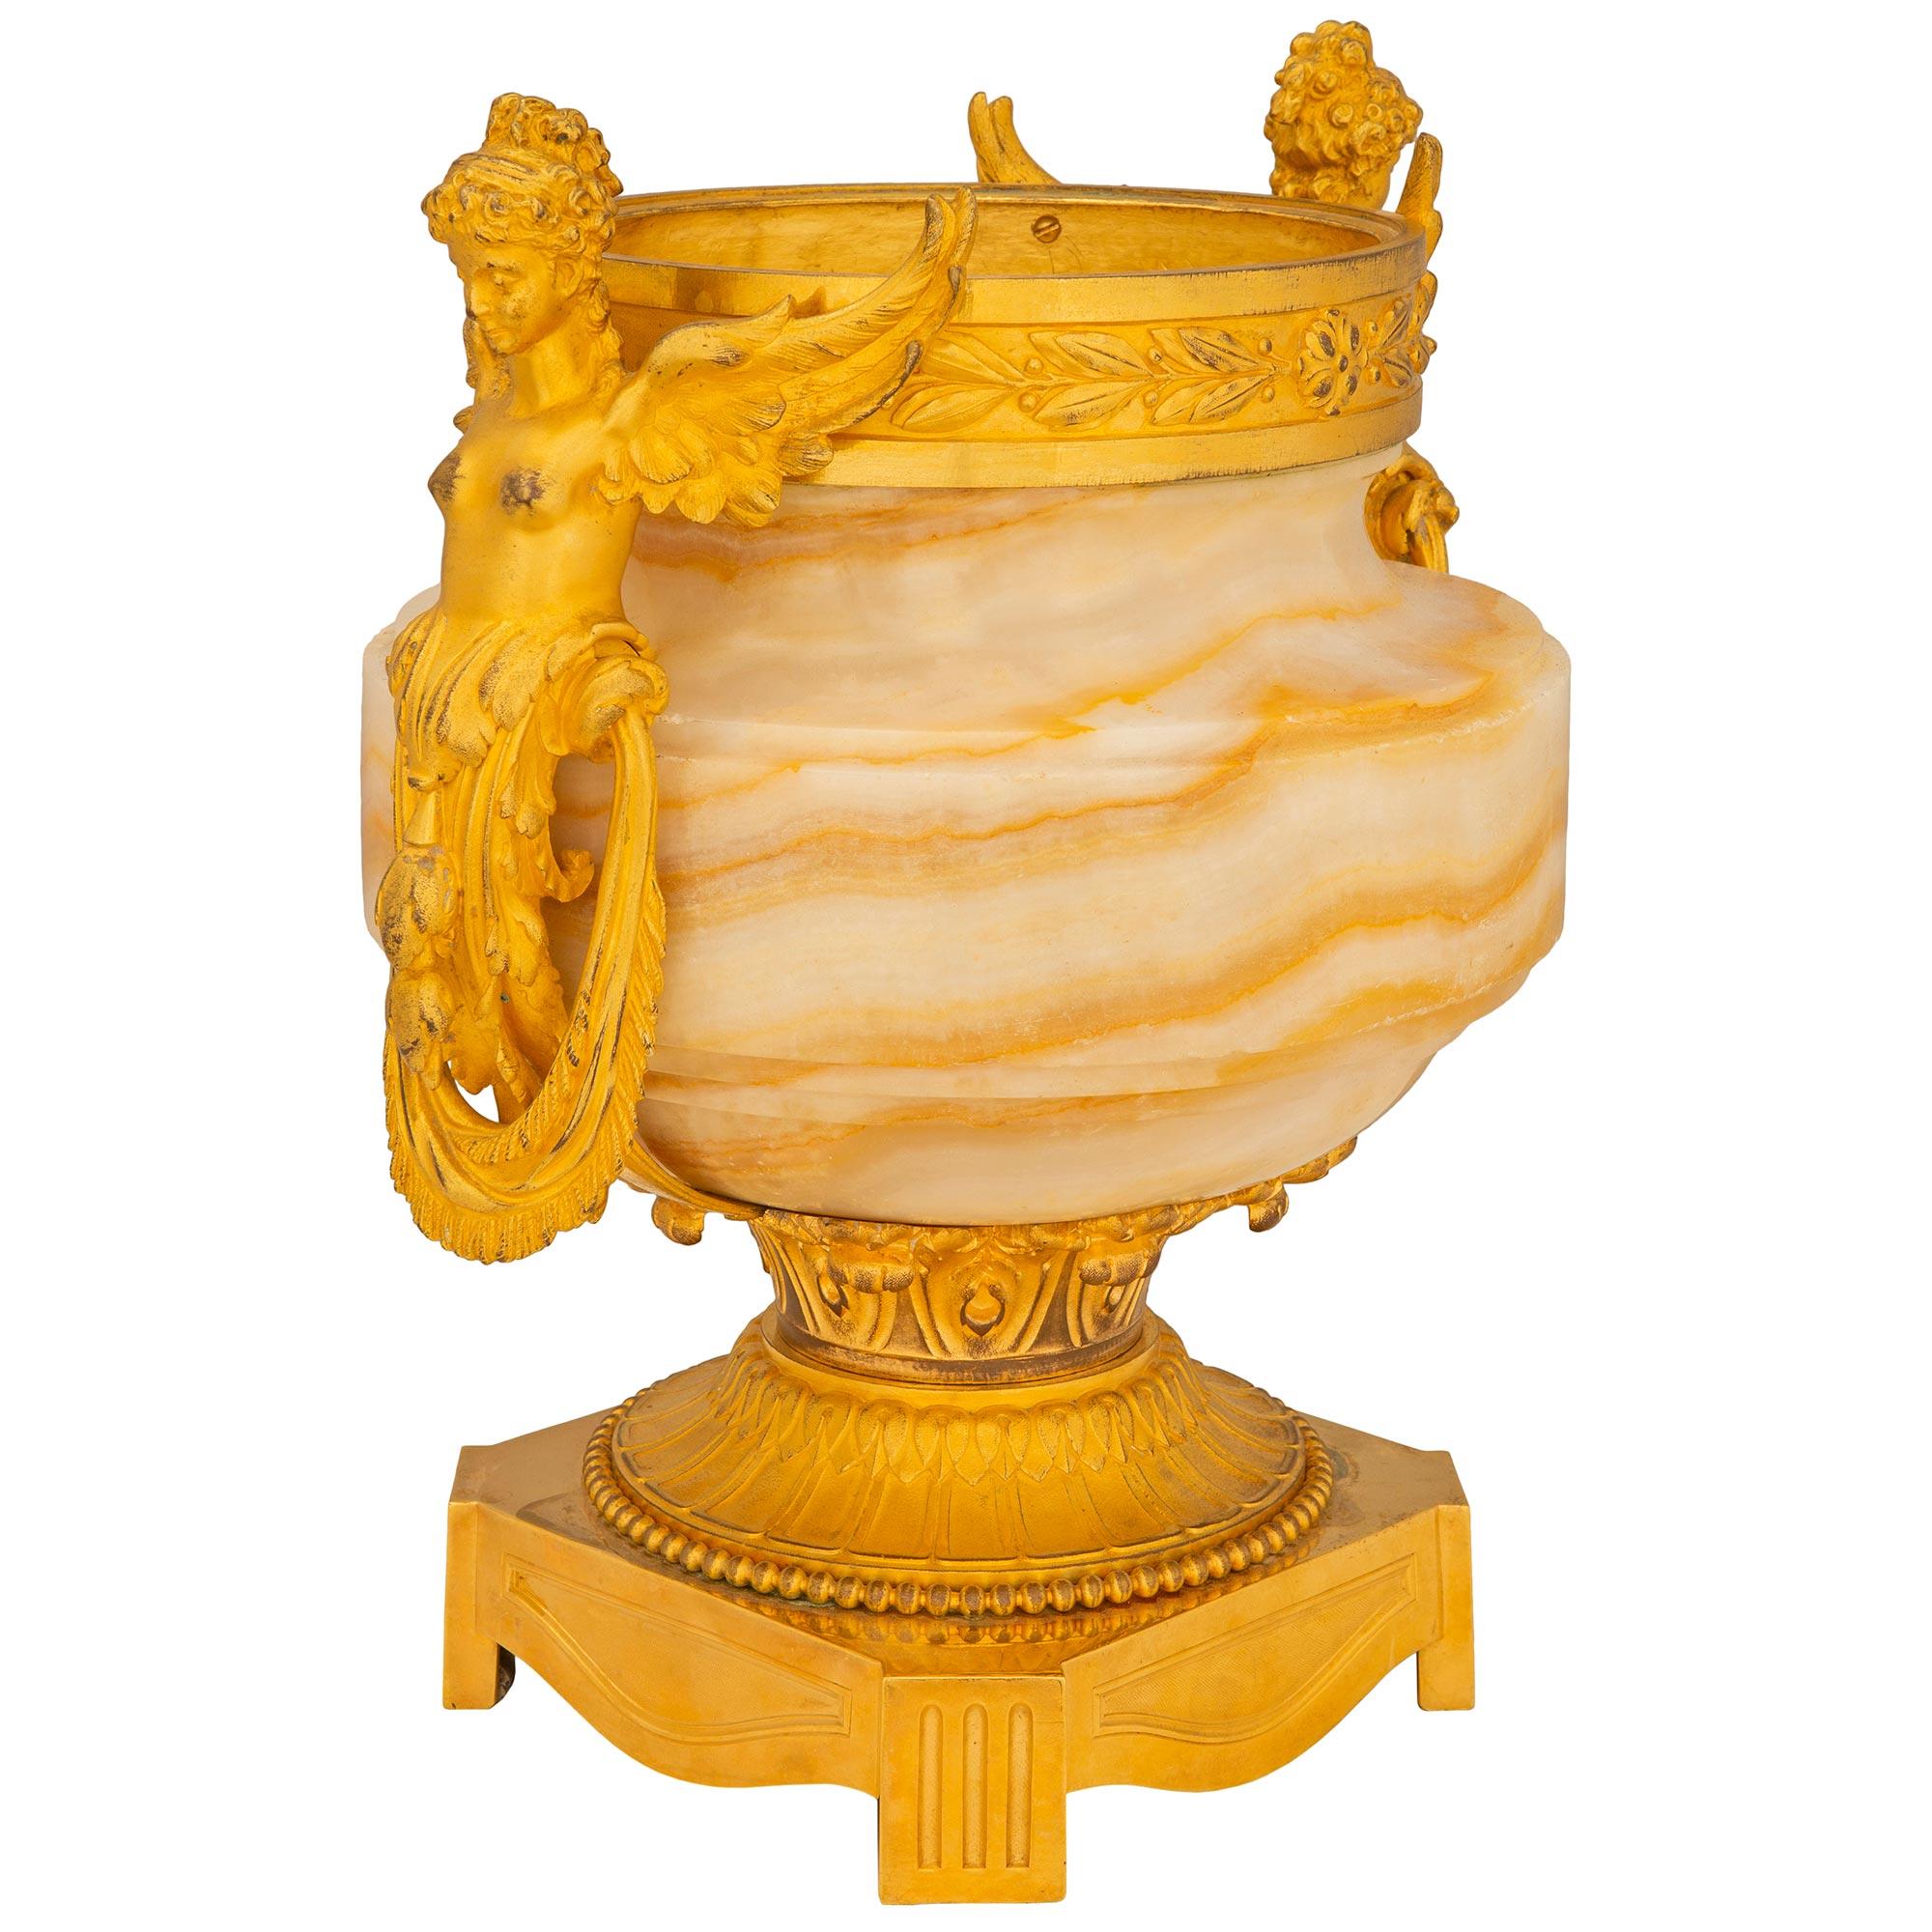 French 19th Century Louis XVI St. Belle Époque Period Onyx and Ormolu Urn For Sale 1